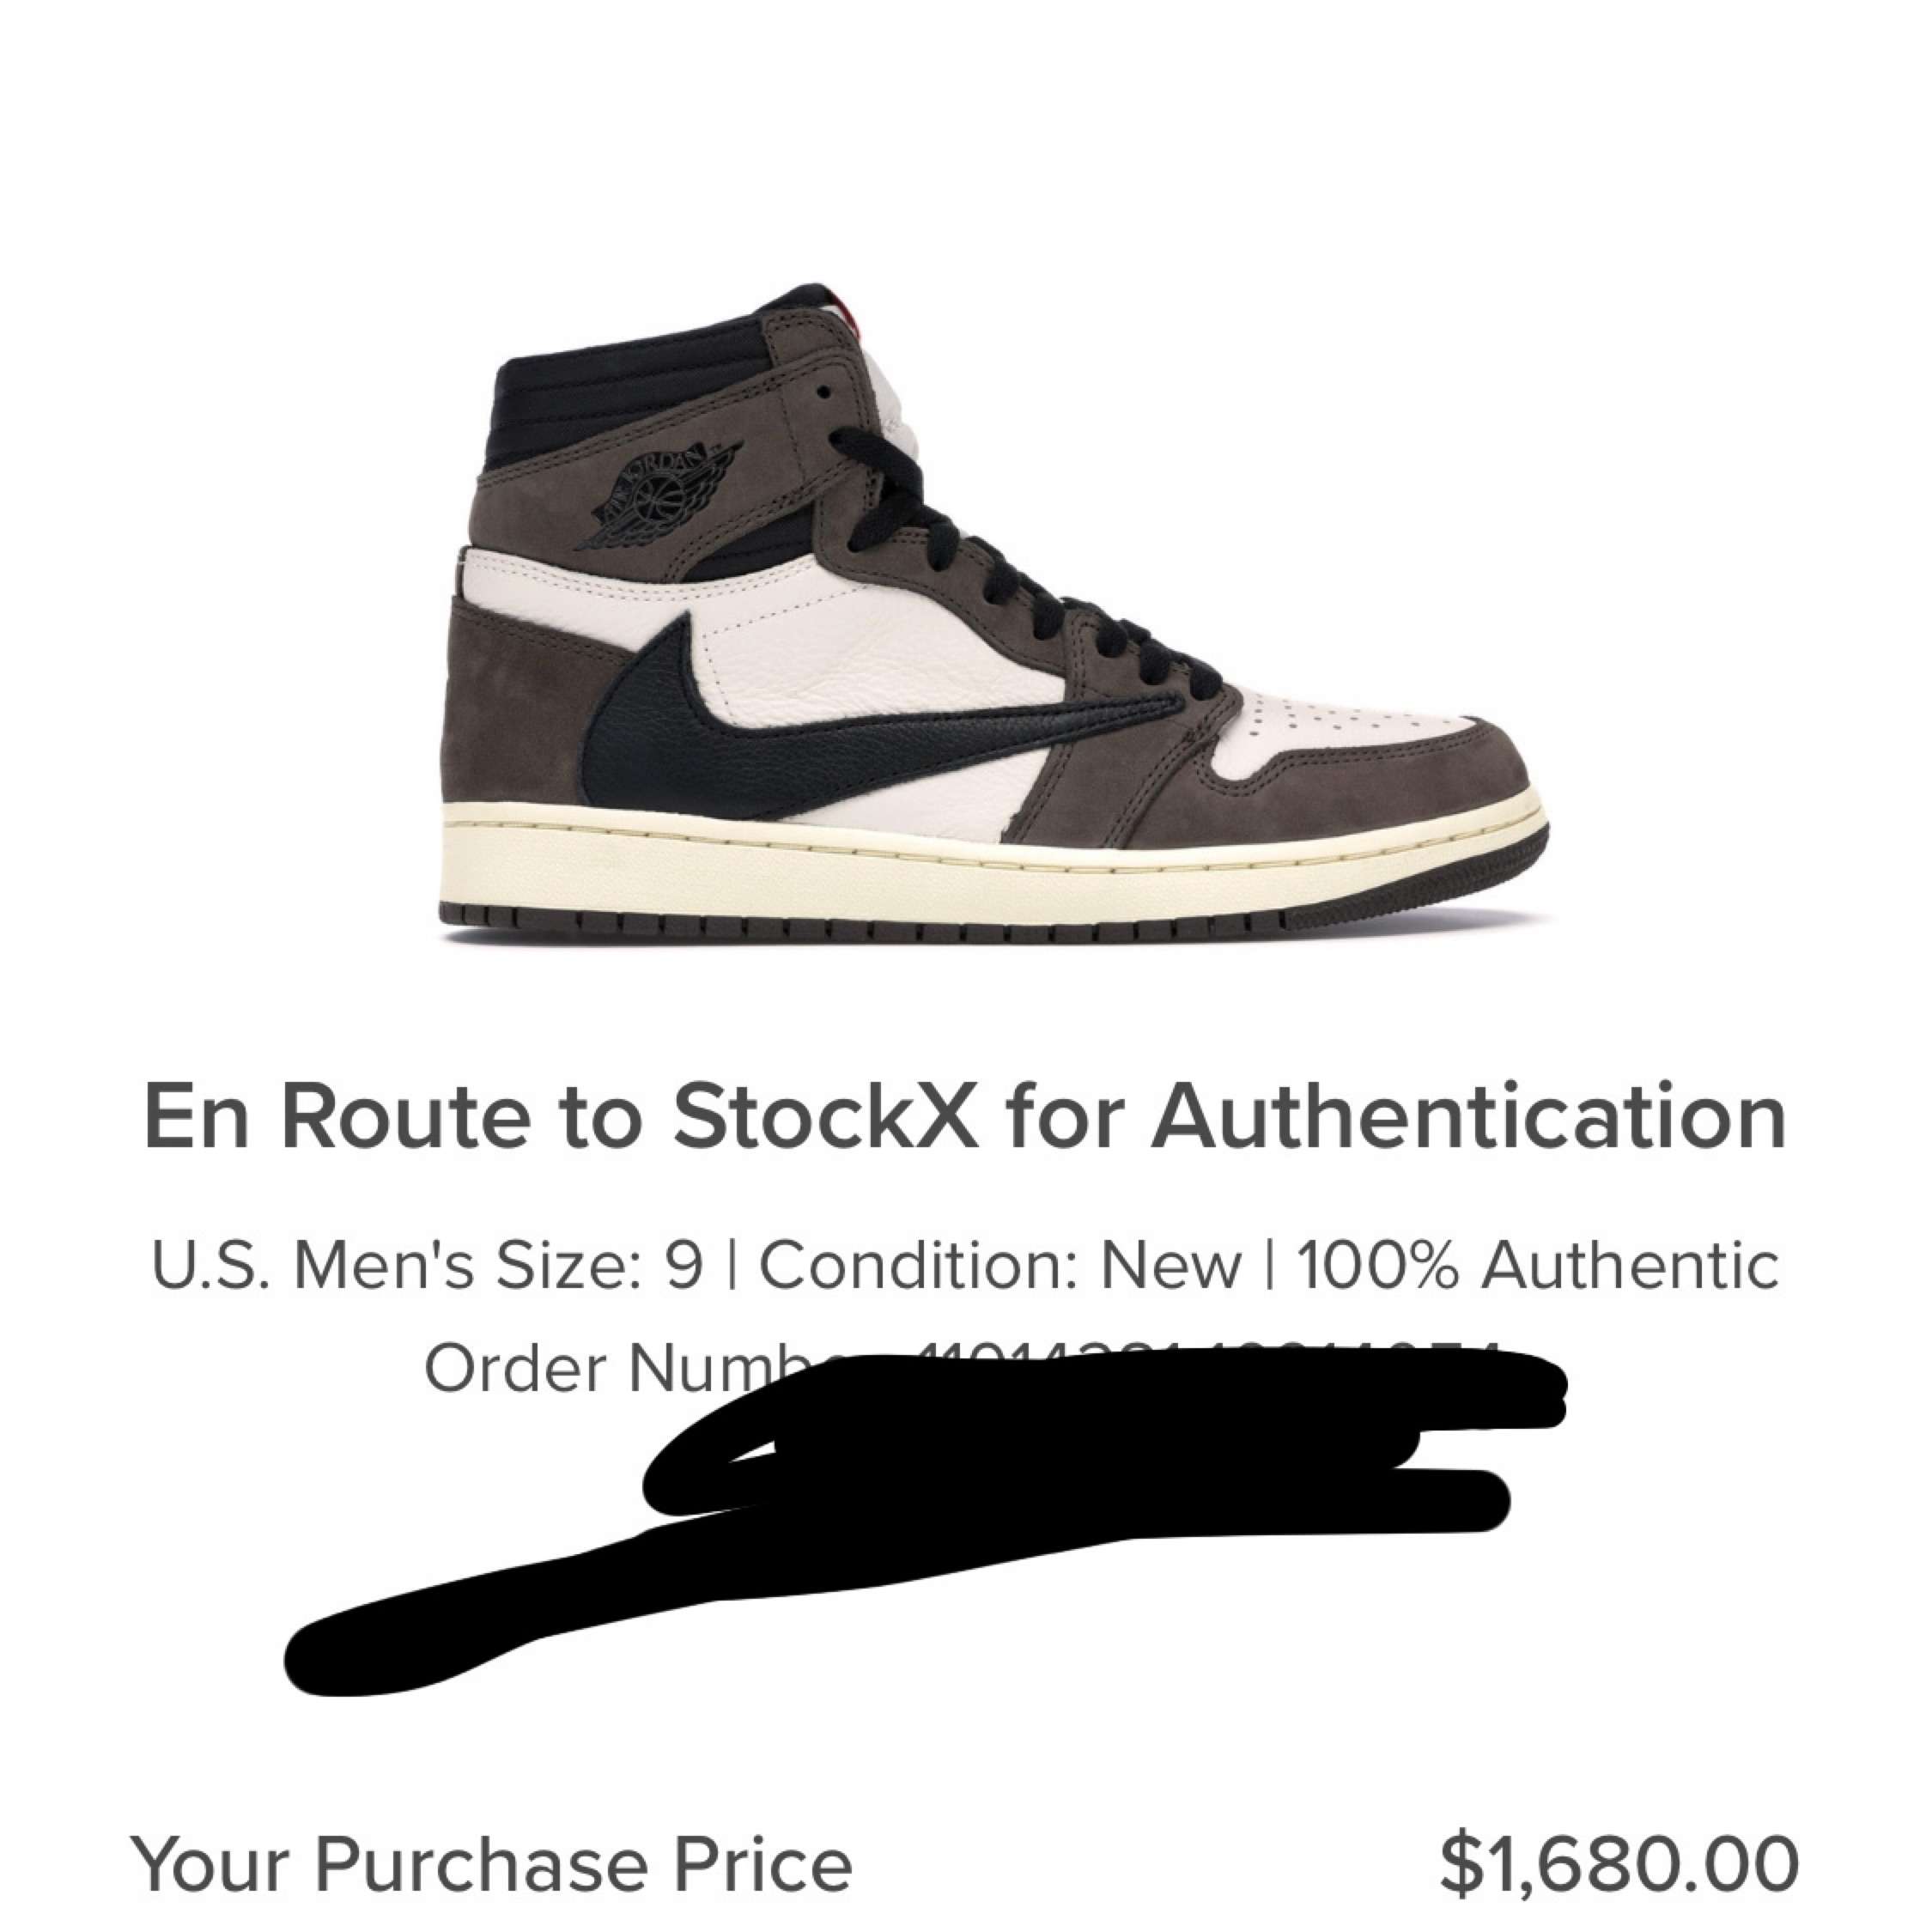 Free Shoes From Stockx Method